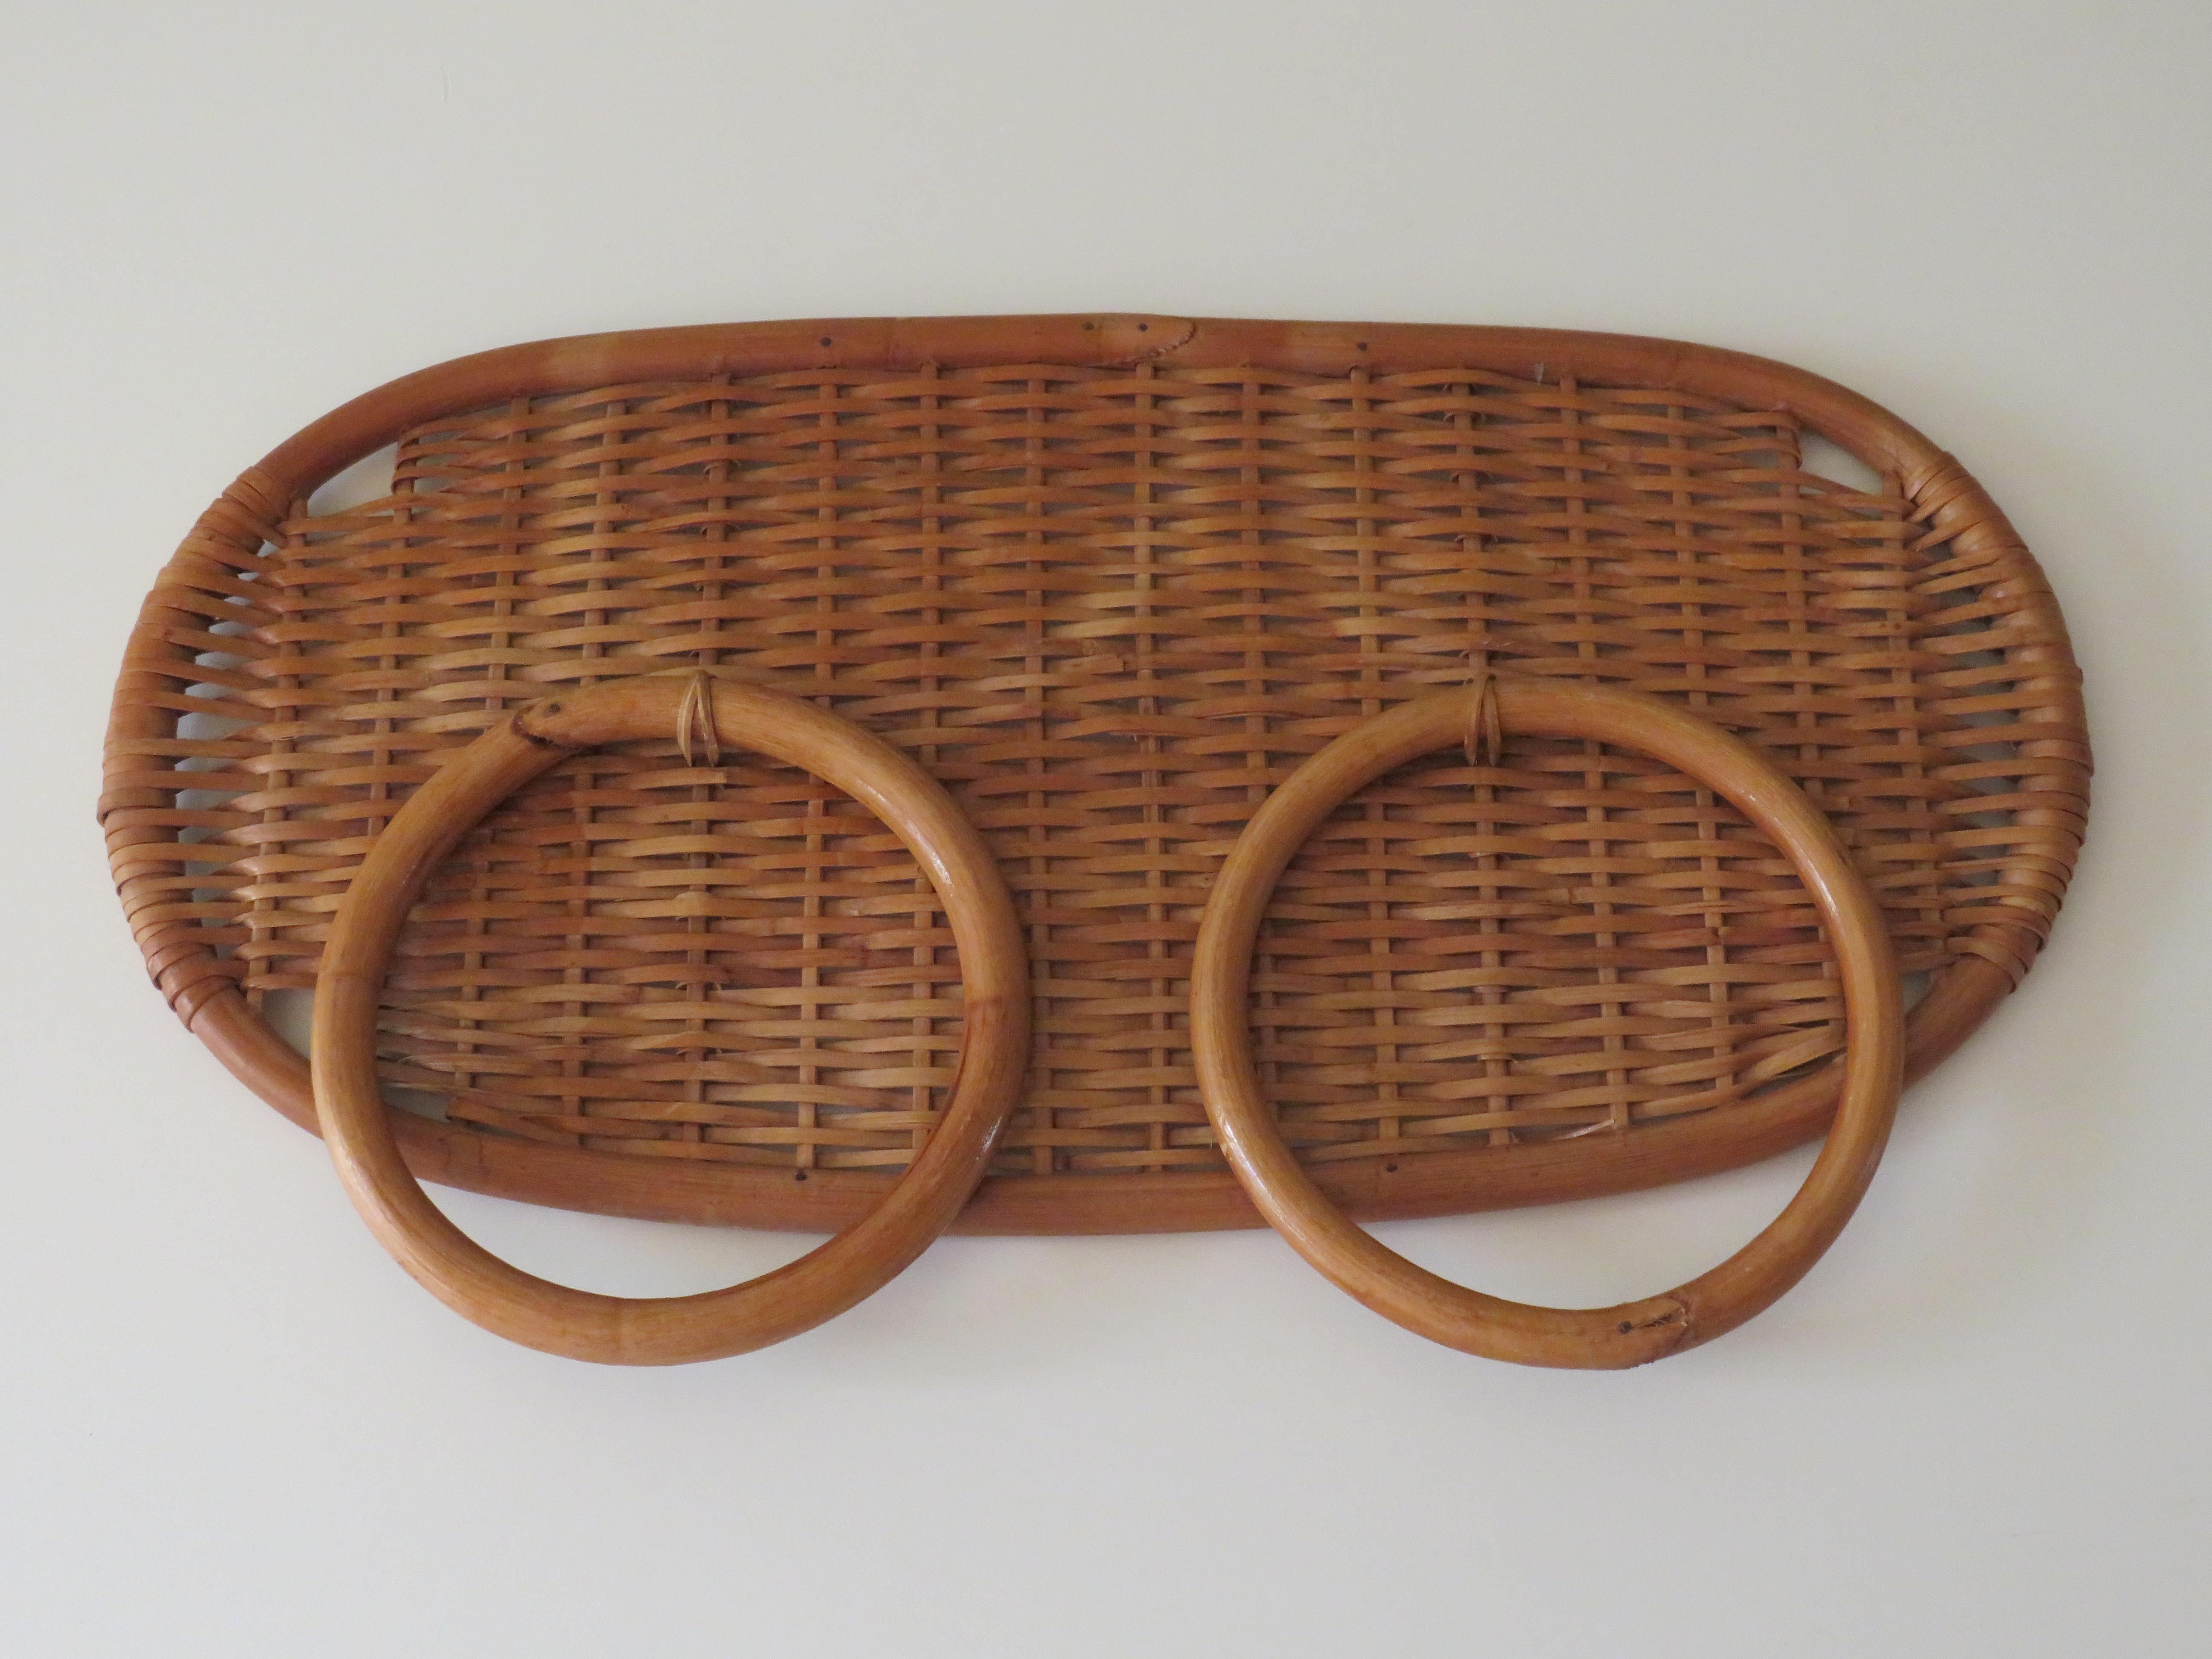 Beautiful Italian, mid-century towel rack in rattan-bamboo.
Perfect for the kitchen or bathroom.
The height of the rack is 28 cm, the width 46 cm and the depth 3 cm.
There are 2 suspension points and the diameter of the rings is 16.5 cm.